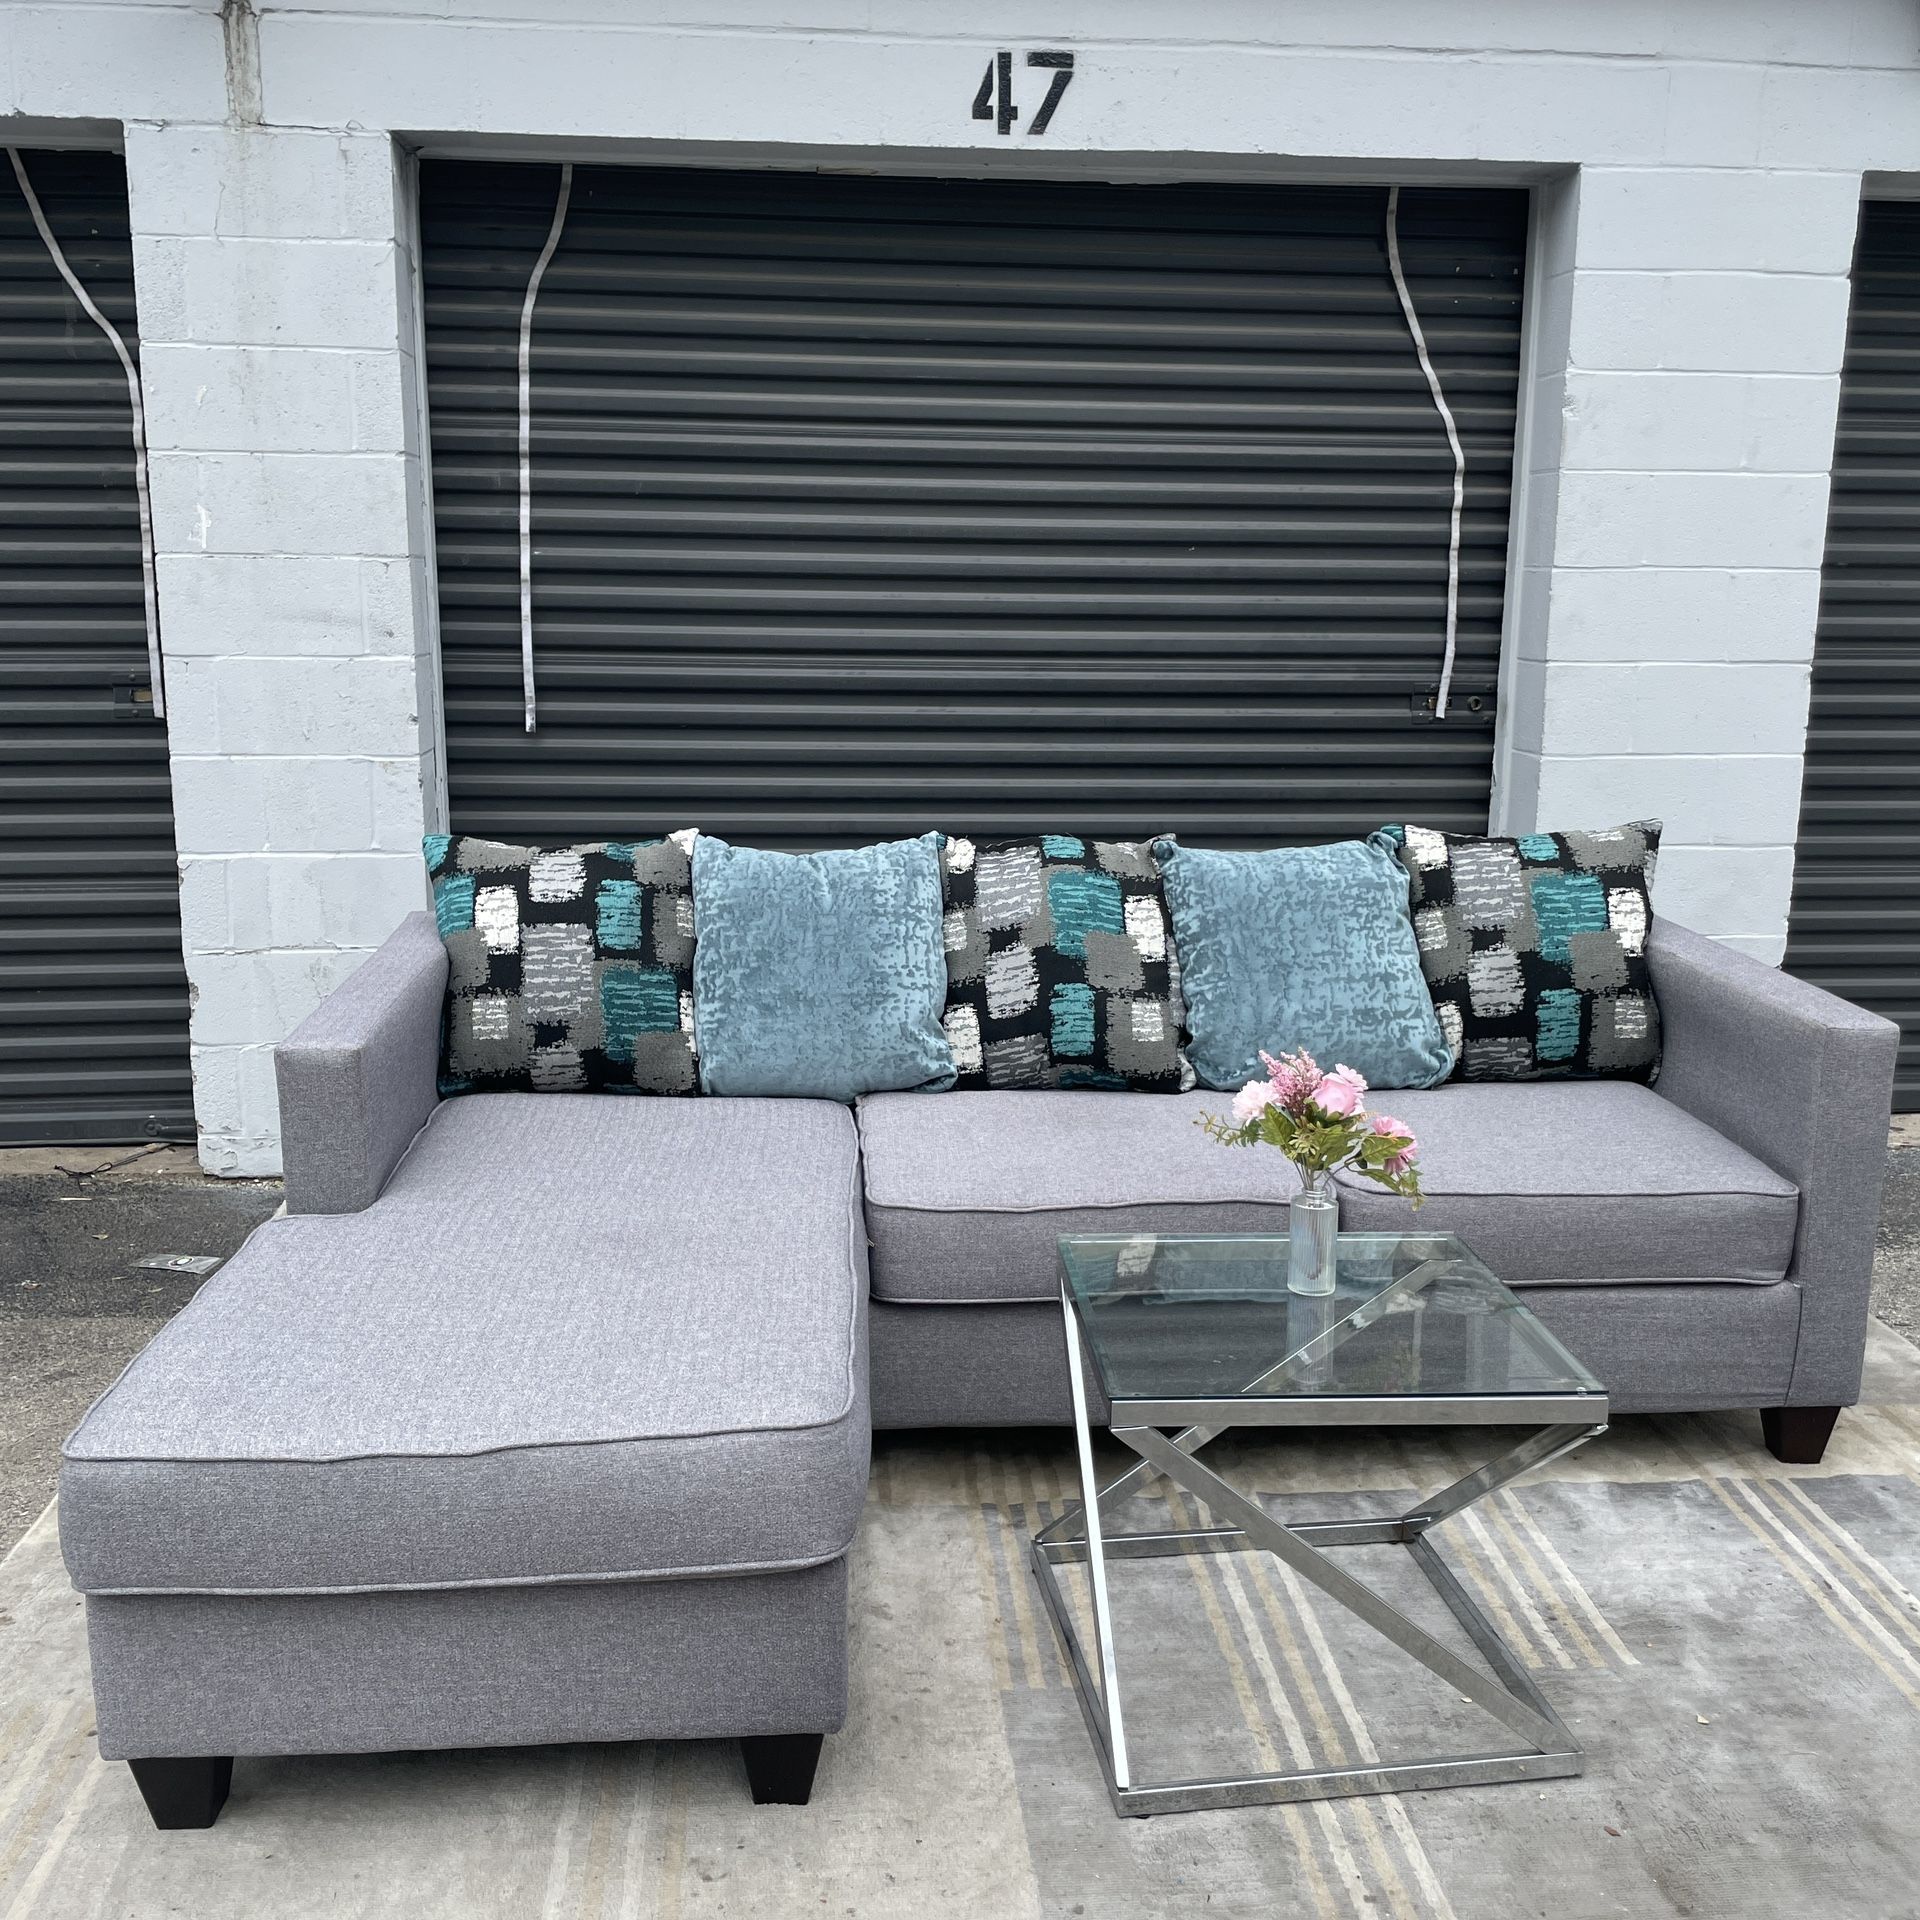 Reverible Sectional Sofa Couch with Reversible Pillows 🚛🚛 Delivery Available